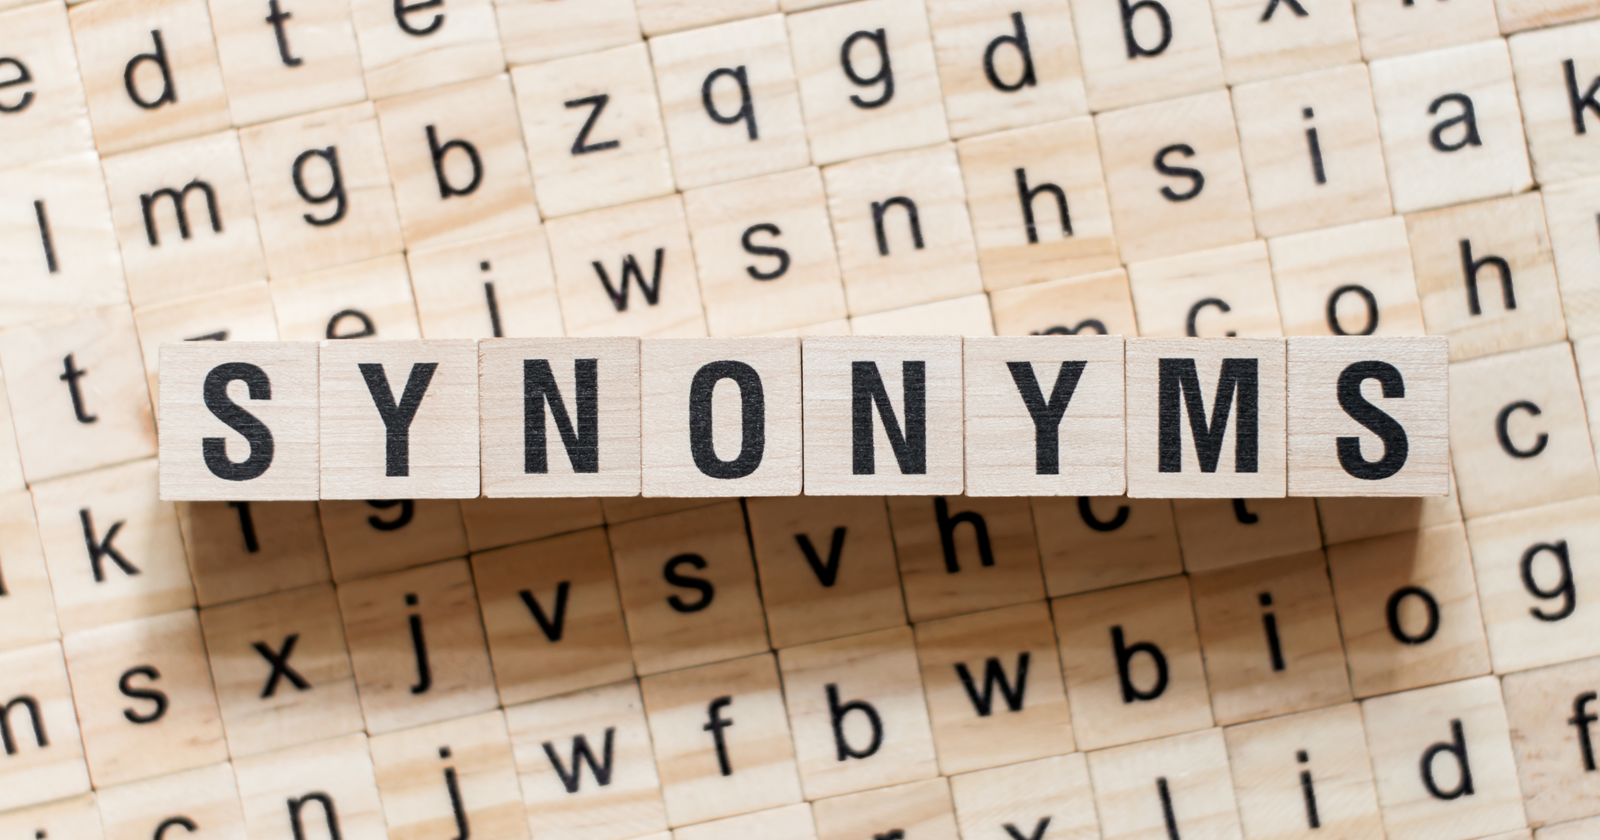 Google May Treat Antonyms As Synonyms in Some Cases